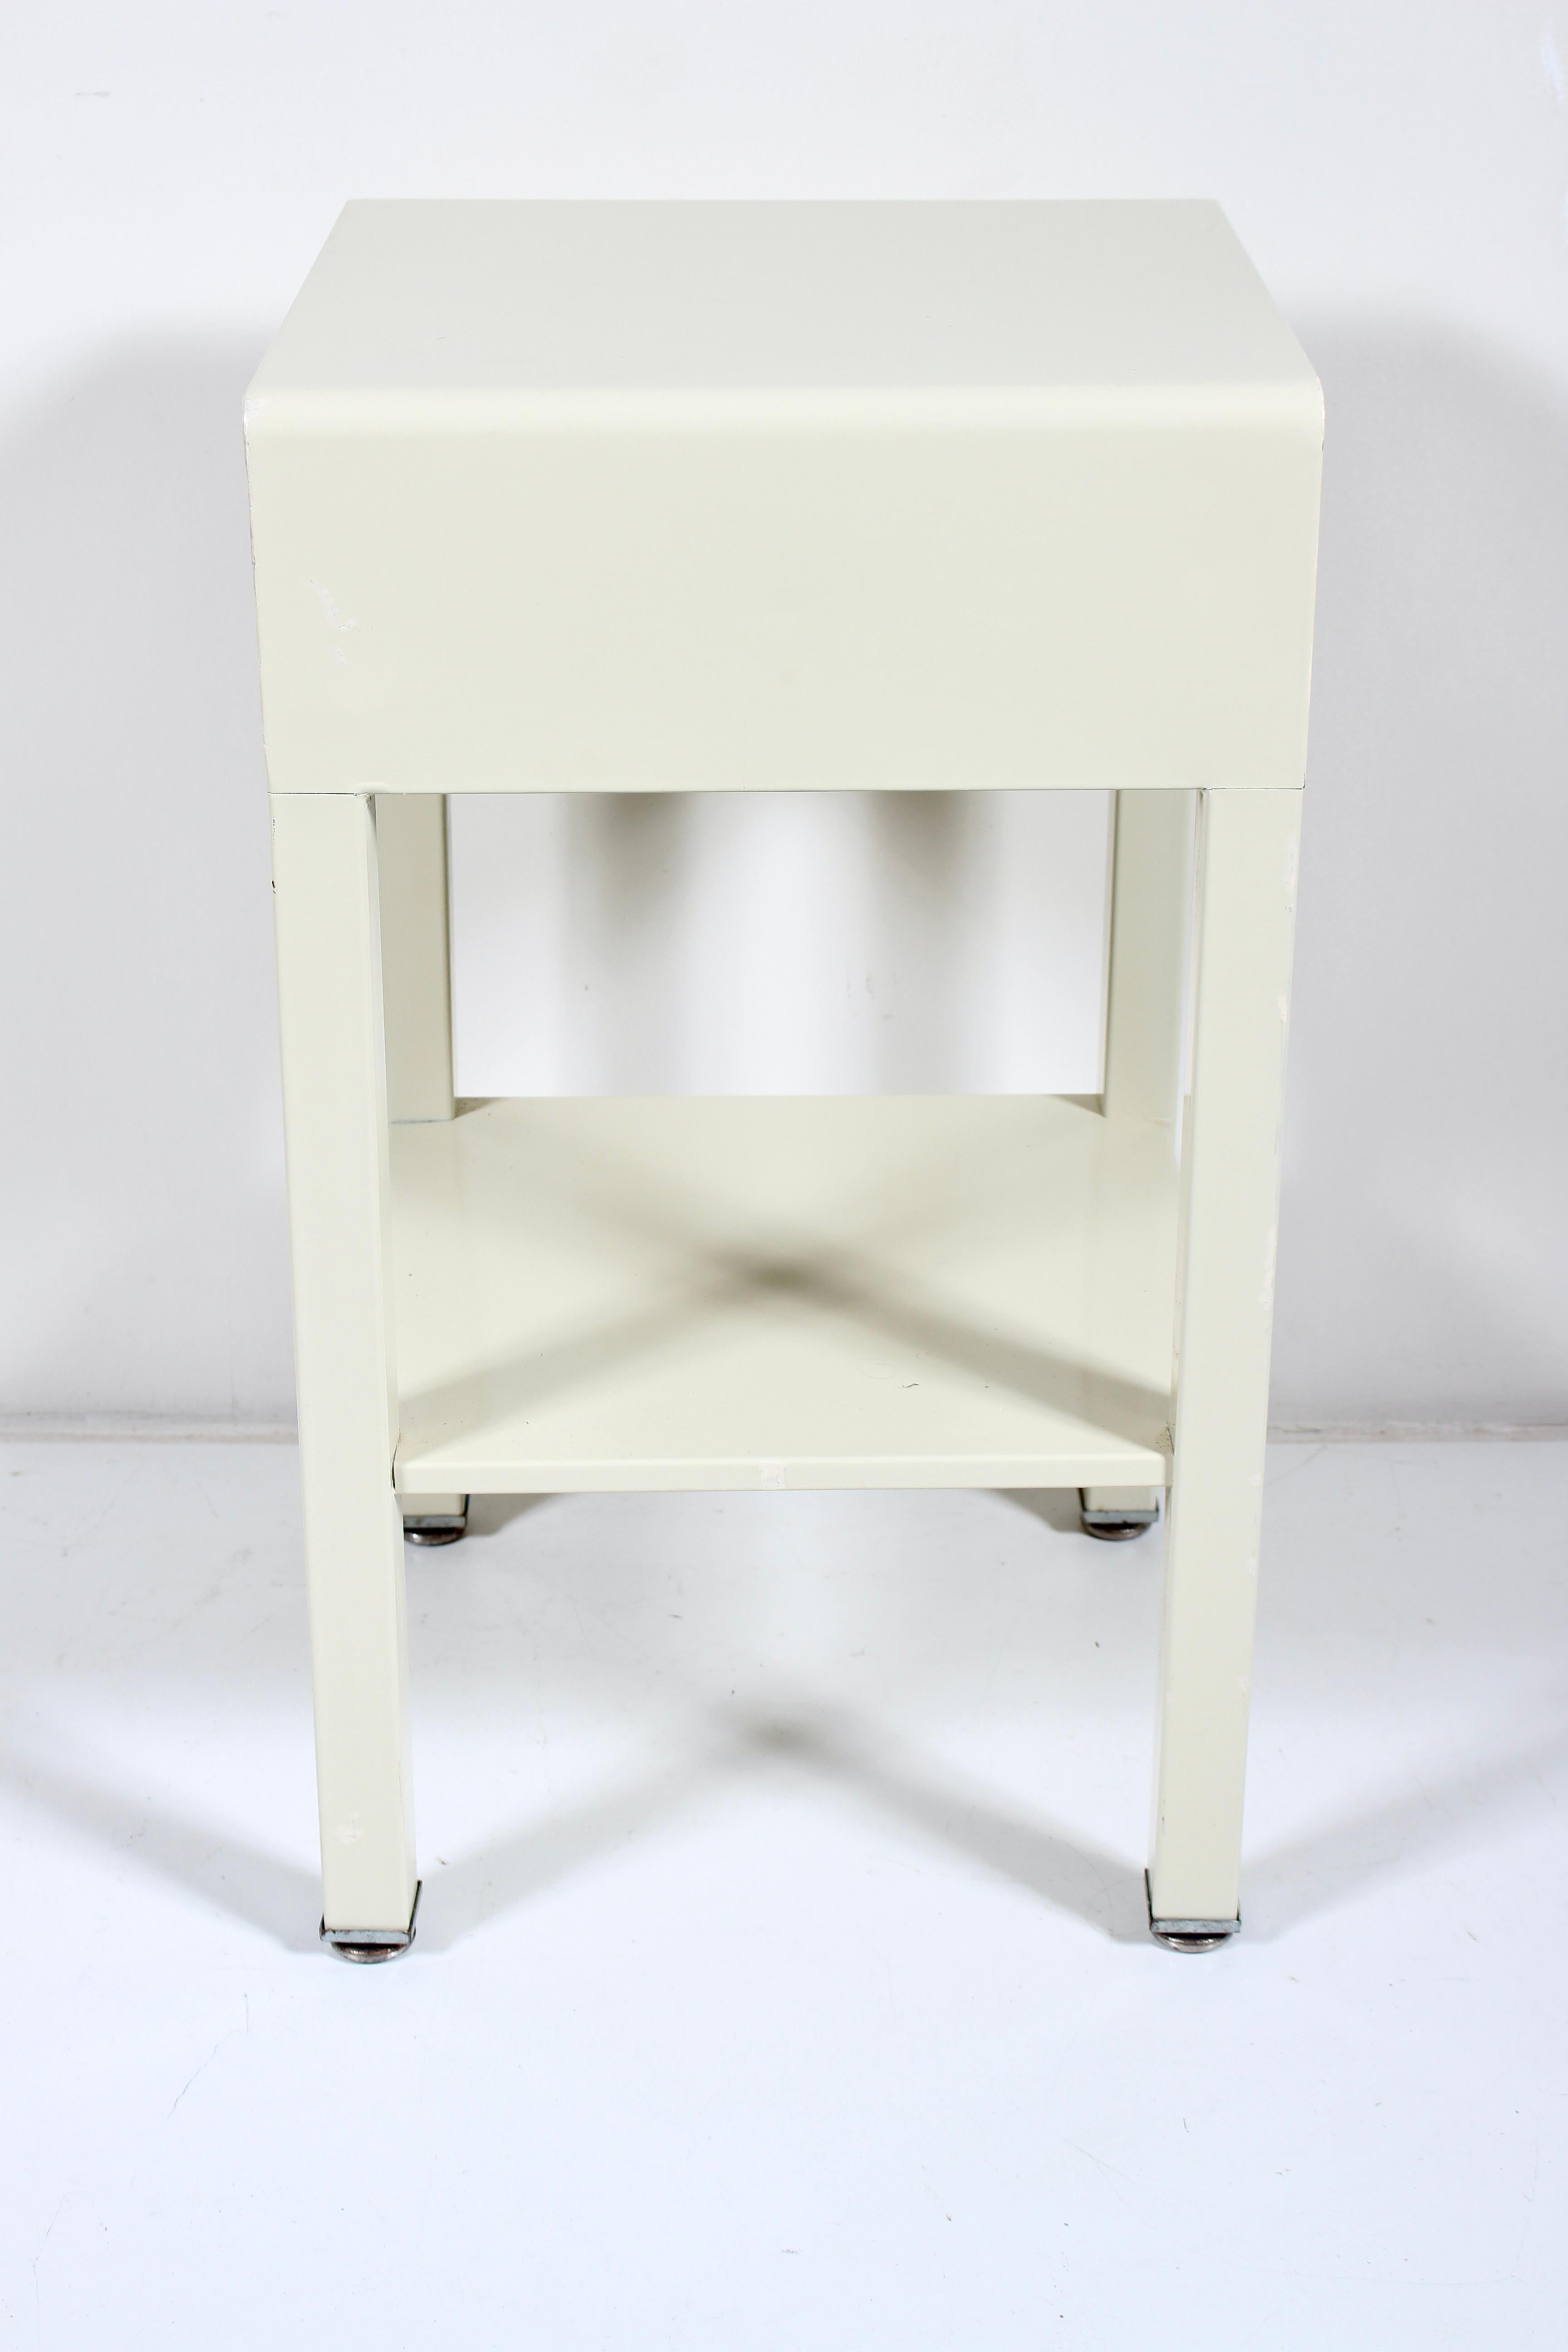 Norman Bel Geddes for Simmons Off White Enameled Steel Night Stand, 1930's For Sale 1